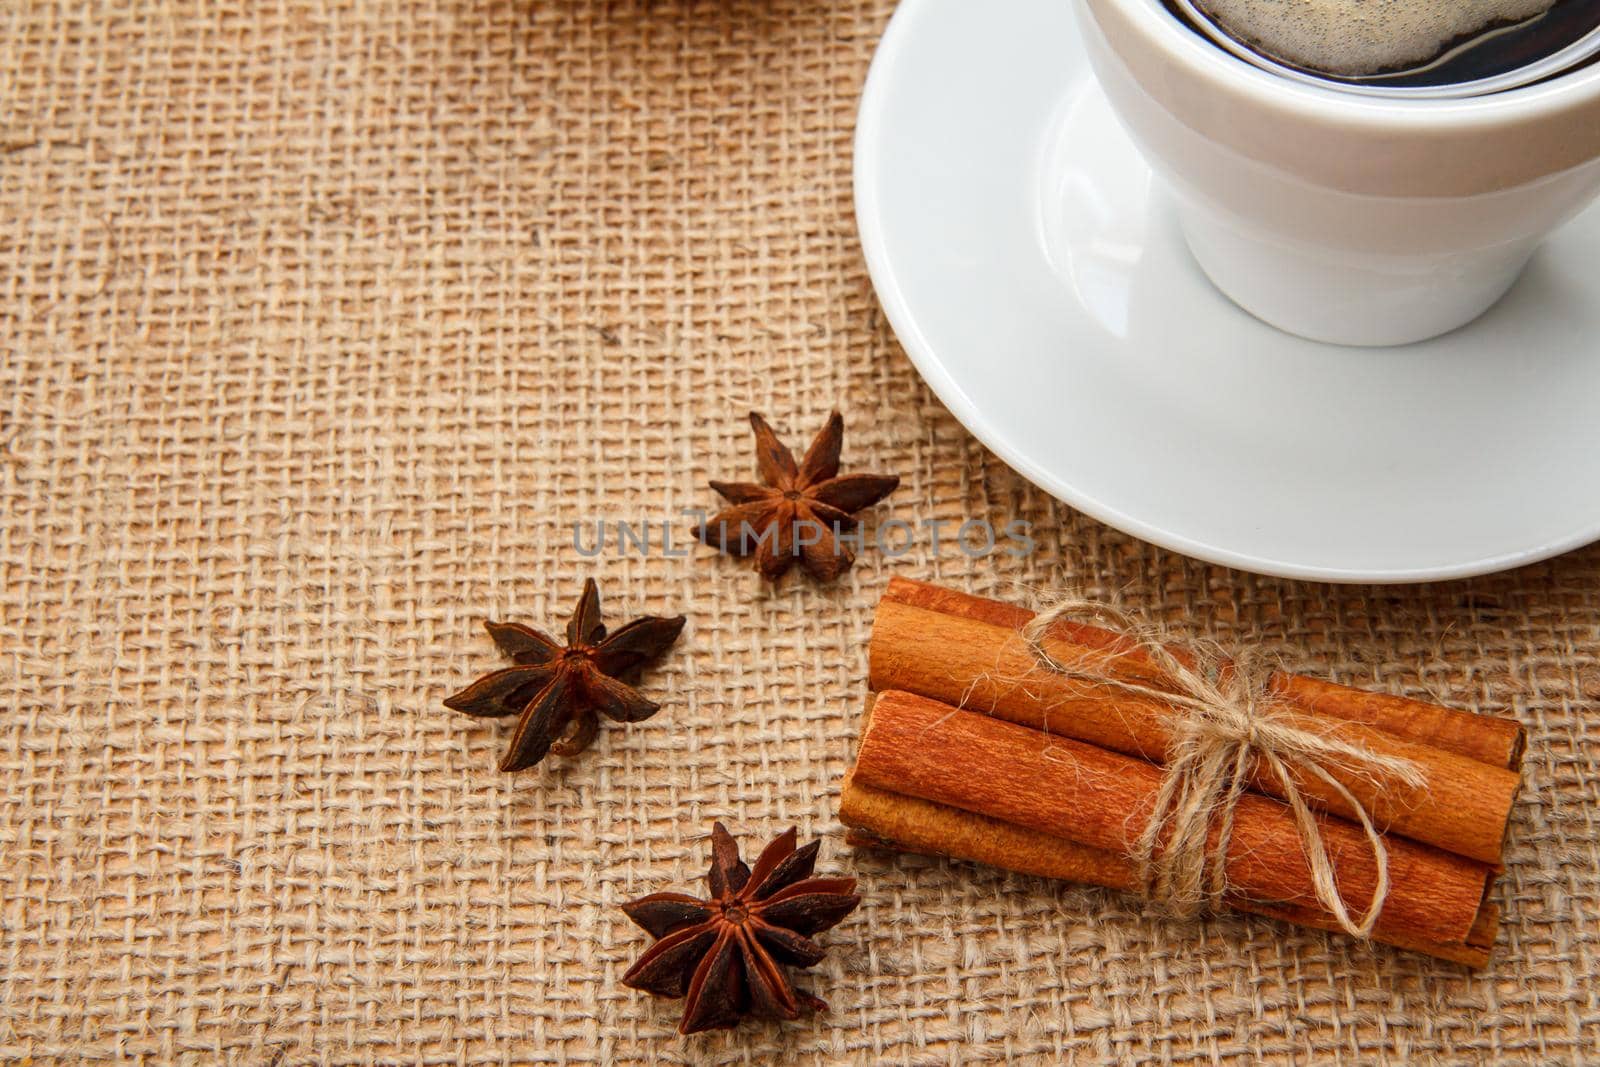 Star anise, cinnamon and cup of black coffee on table with sackcloth